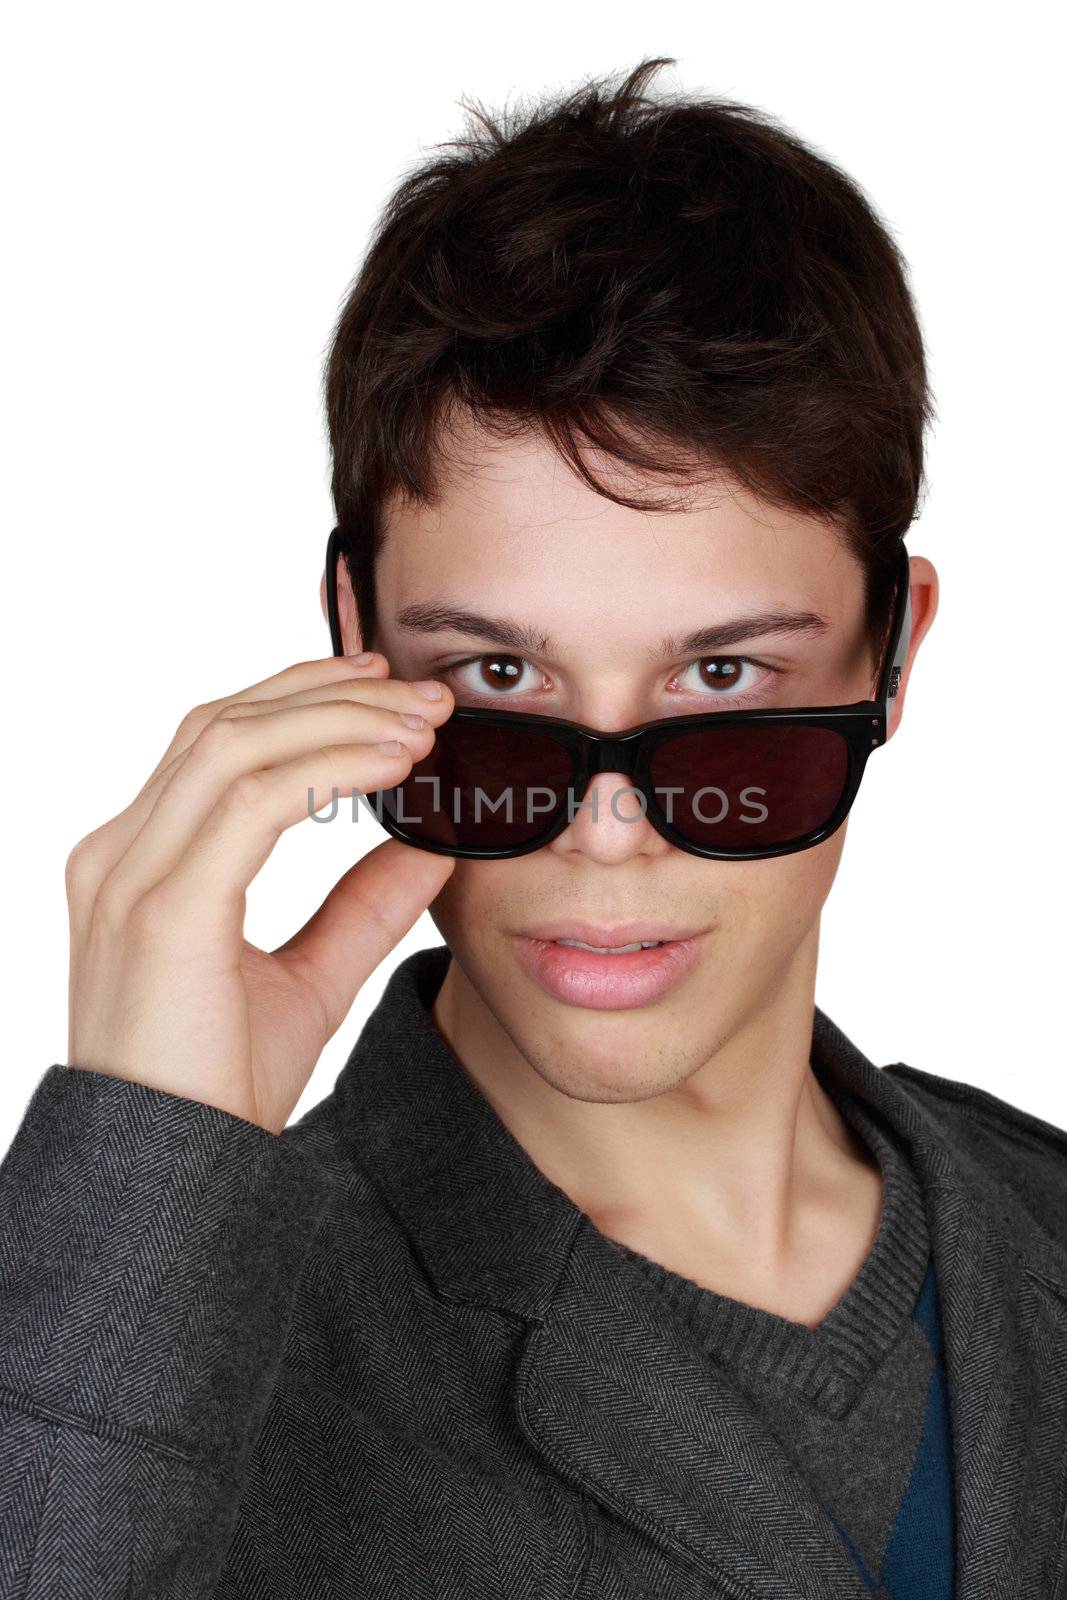 young man with sunglasses, isolated on white